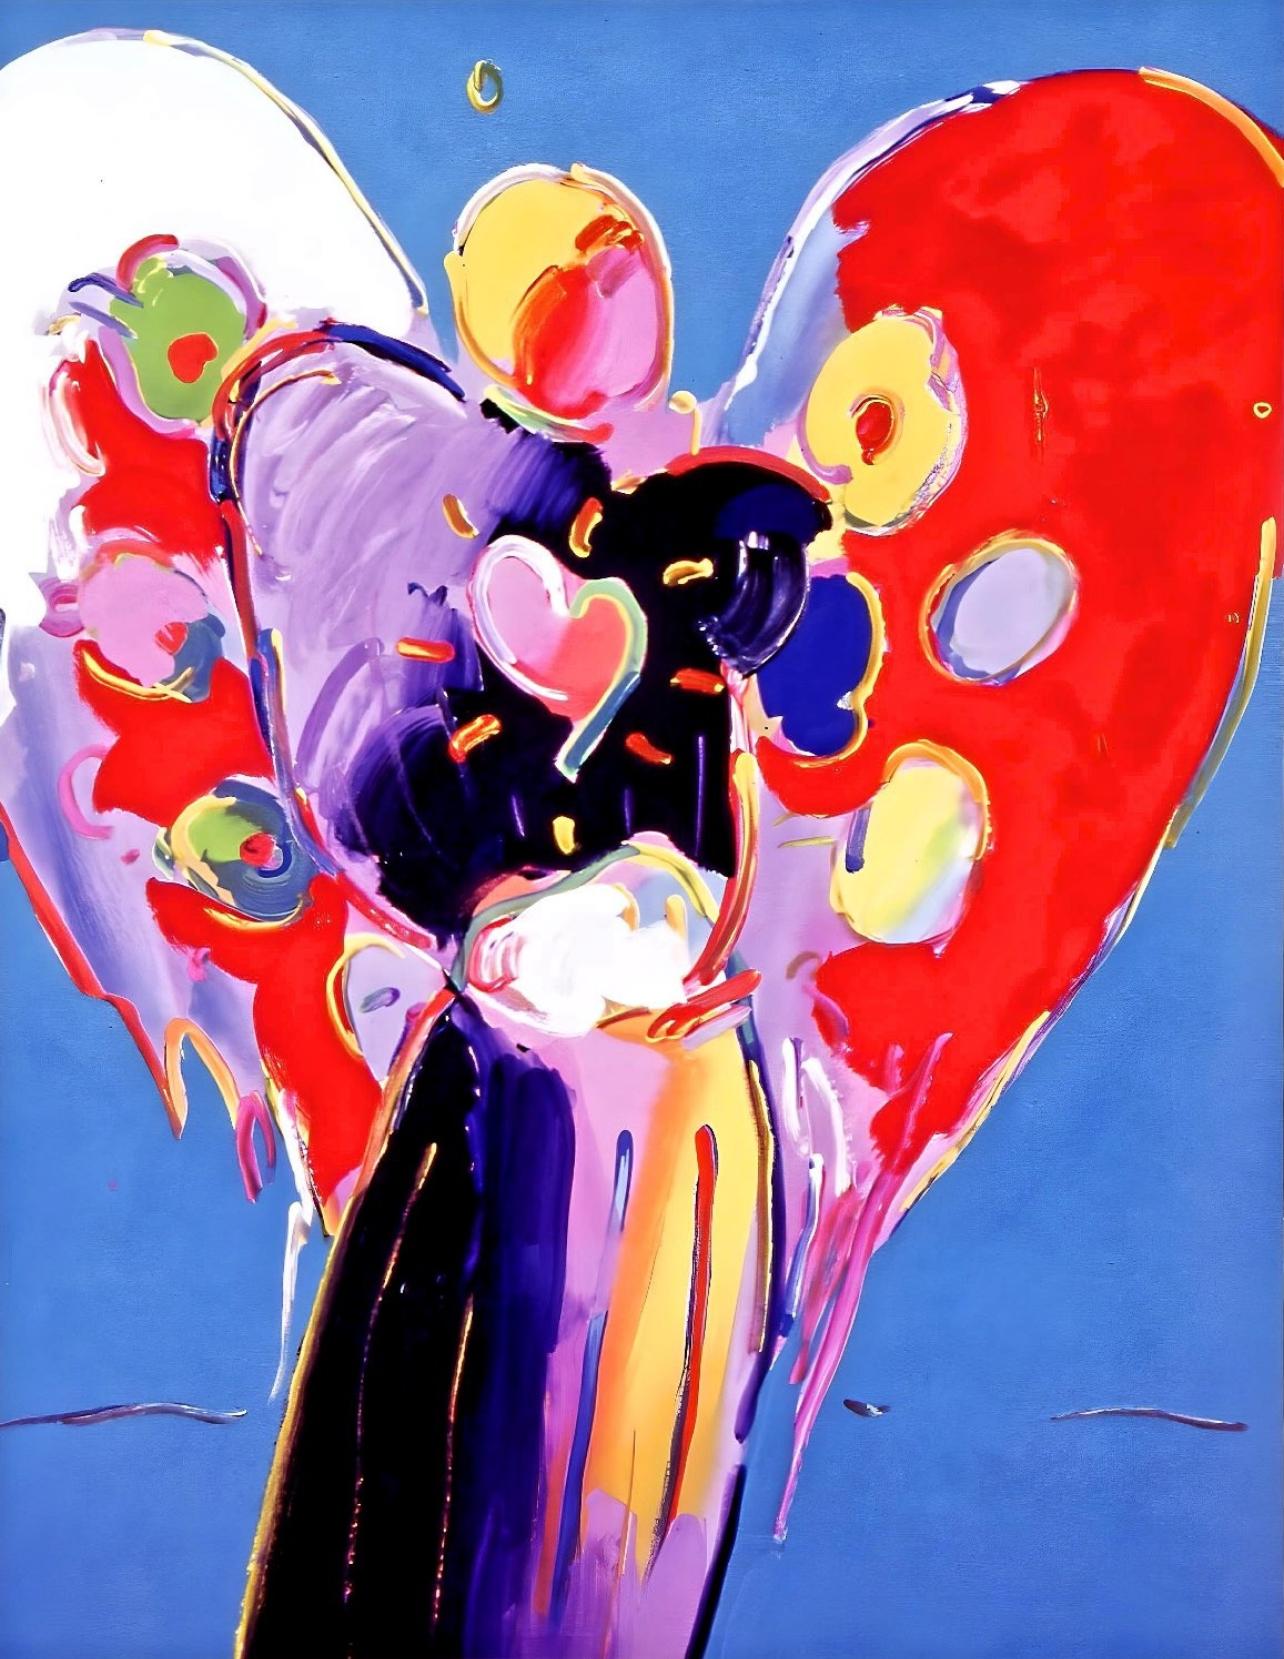 Artist: Peter Max (1937)
Title: Blue Angel With Heart
Year: 2003
Edition: 500/500, plus proofs
Medium: Lithograph on archival paper
Size: 11.31 x 7.88 inches
Condition: Excellent
Inscription: Signed and numbered by the artist.
Notes: Published by